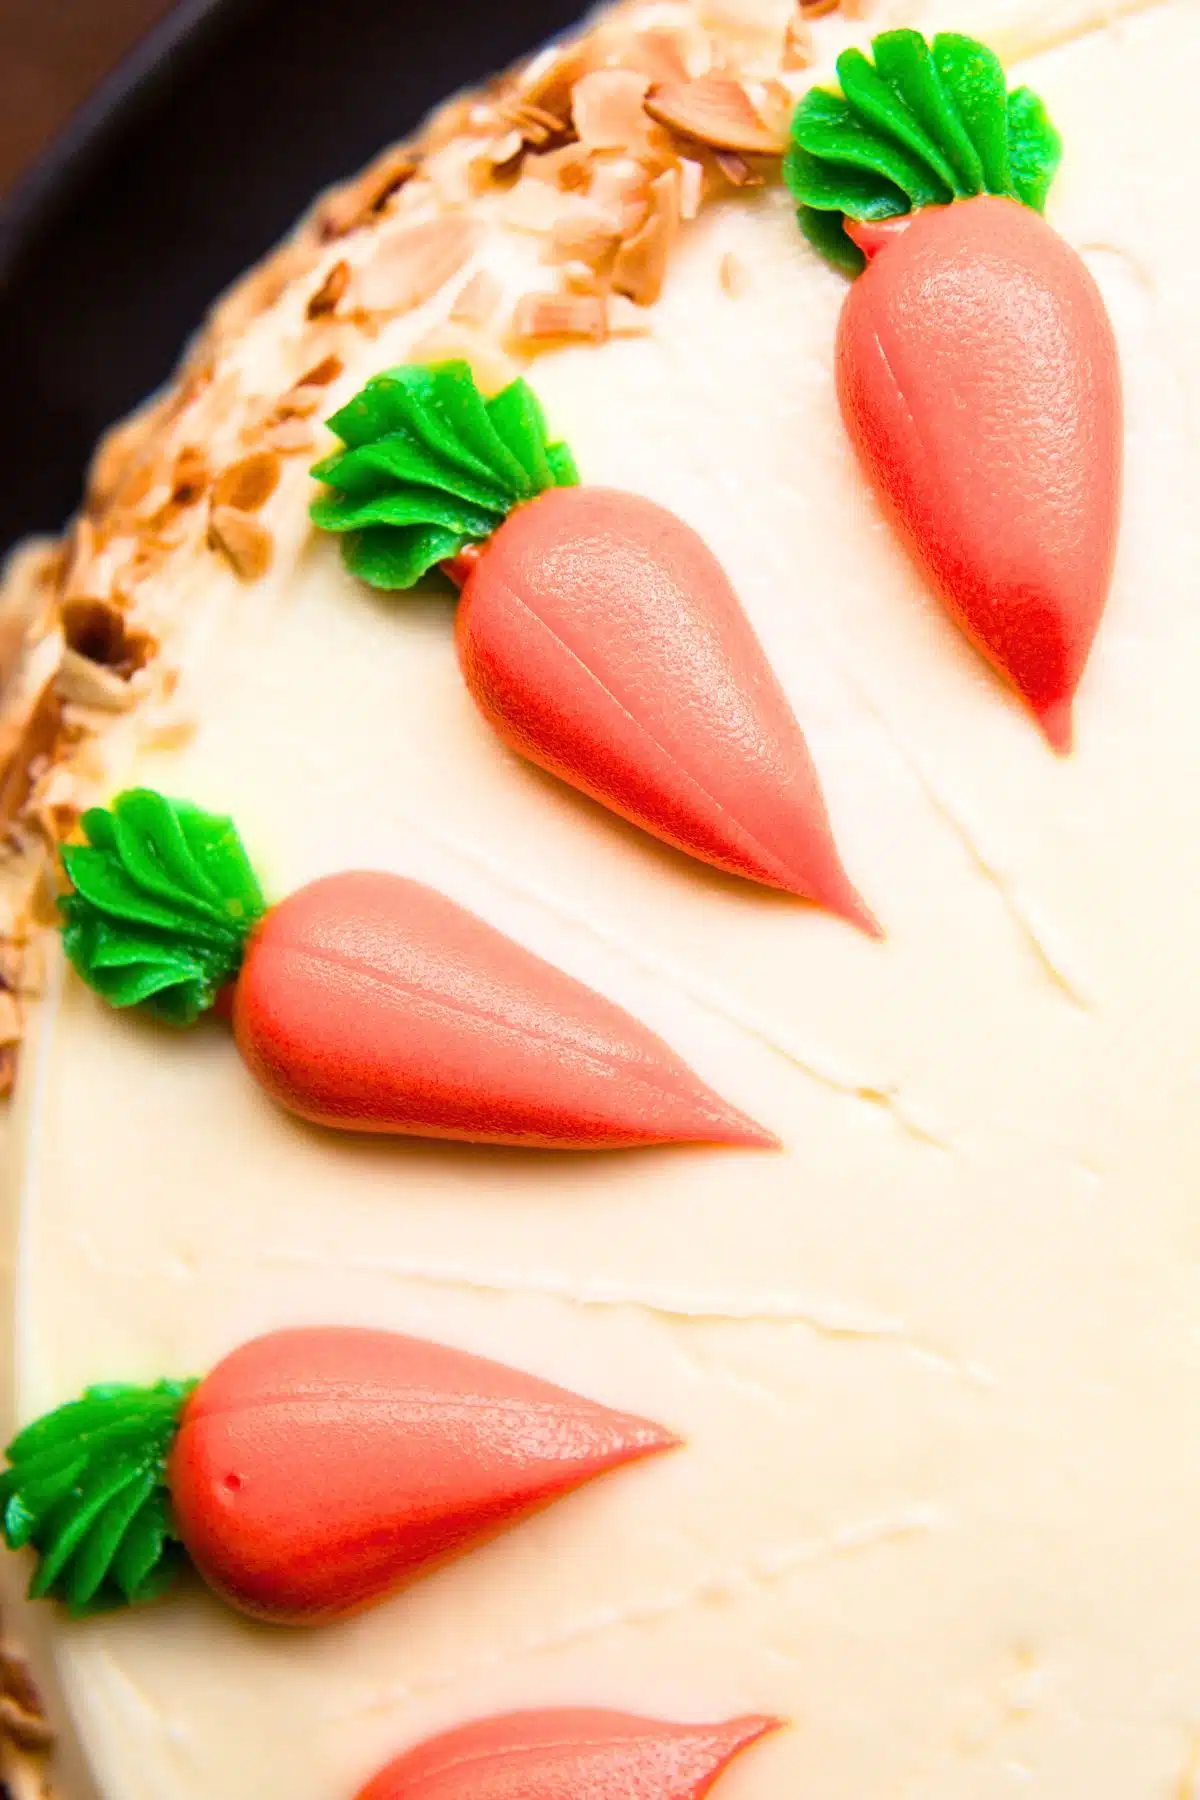 Looking down on a carrot cake with icing carrots on top.